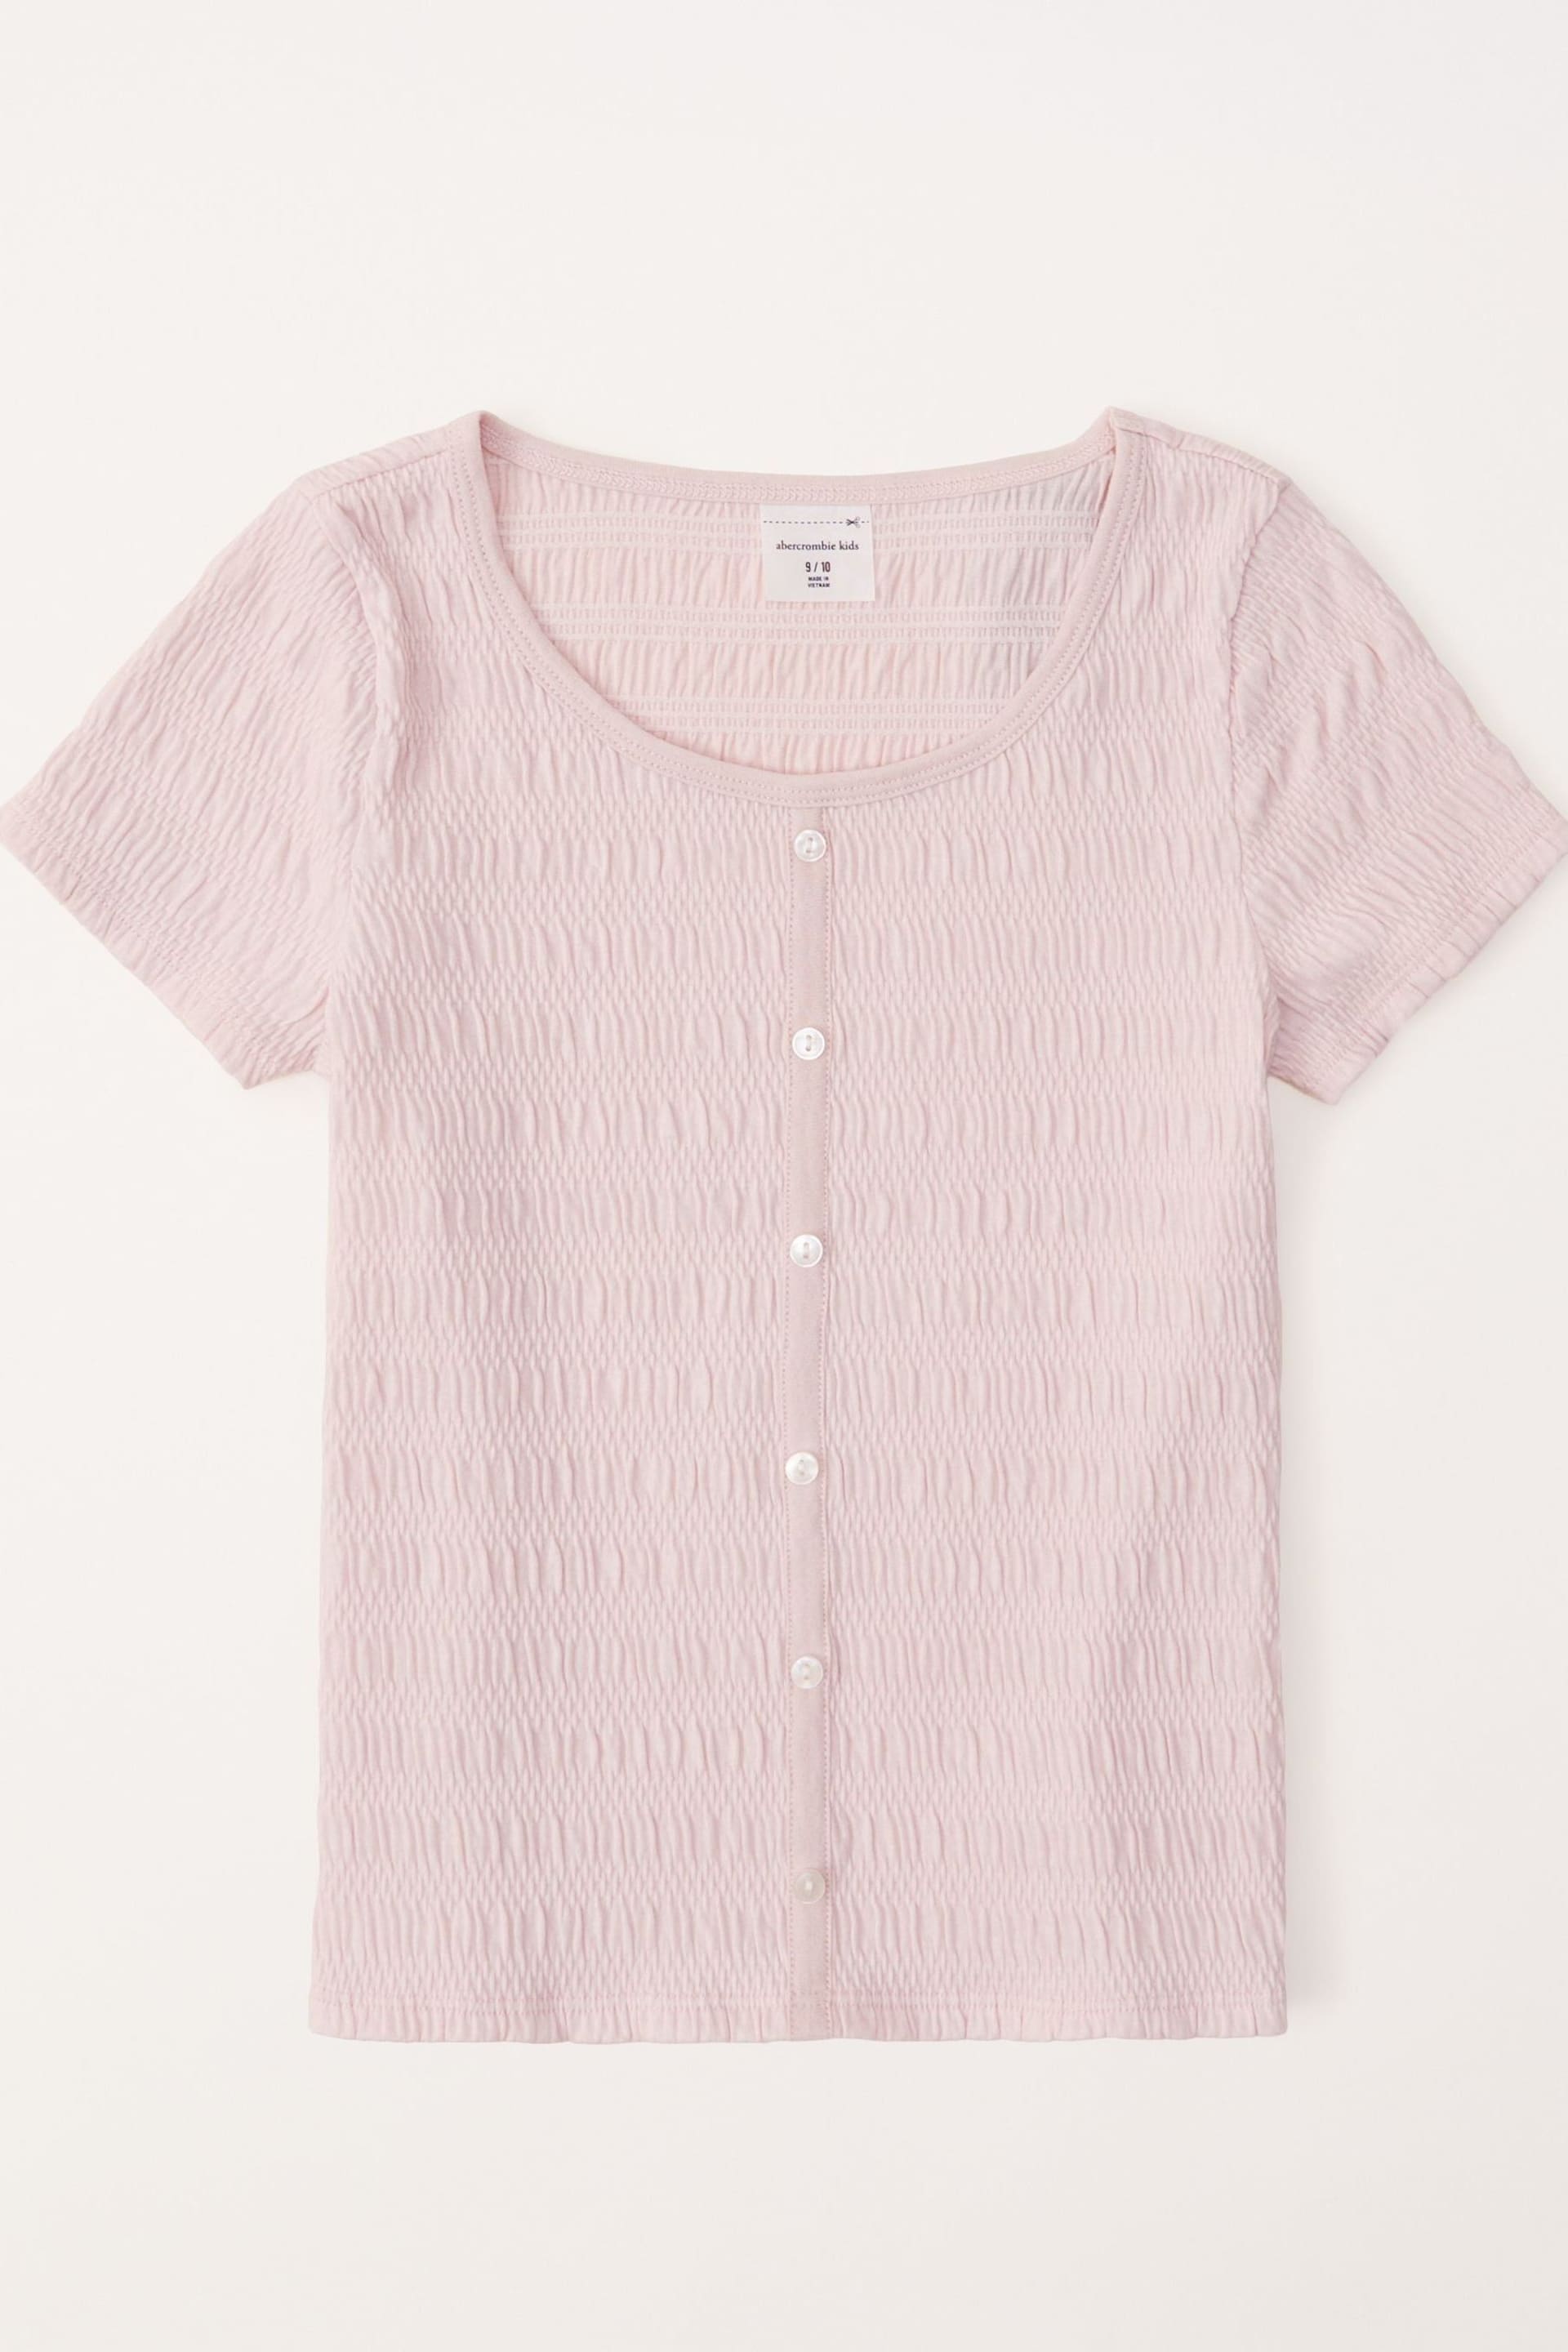 Abercrombie & Fitch Pink Long Sleeve Off Shoulder Textured Top - Image 1 of 2